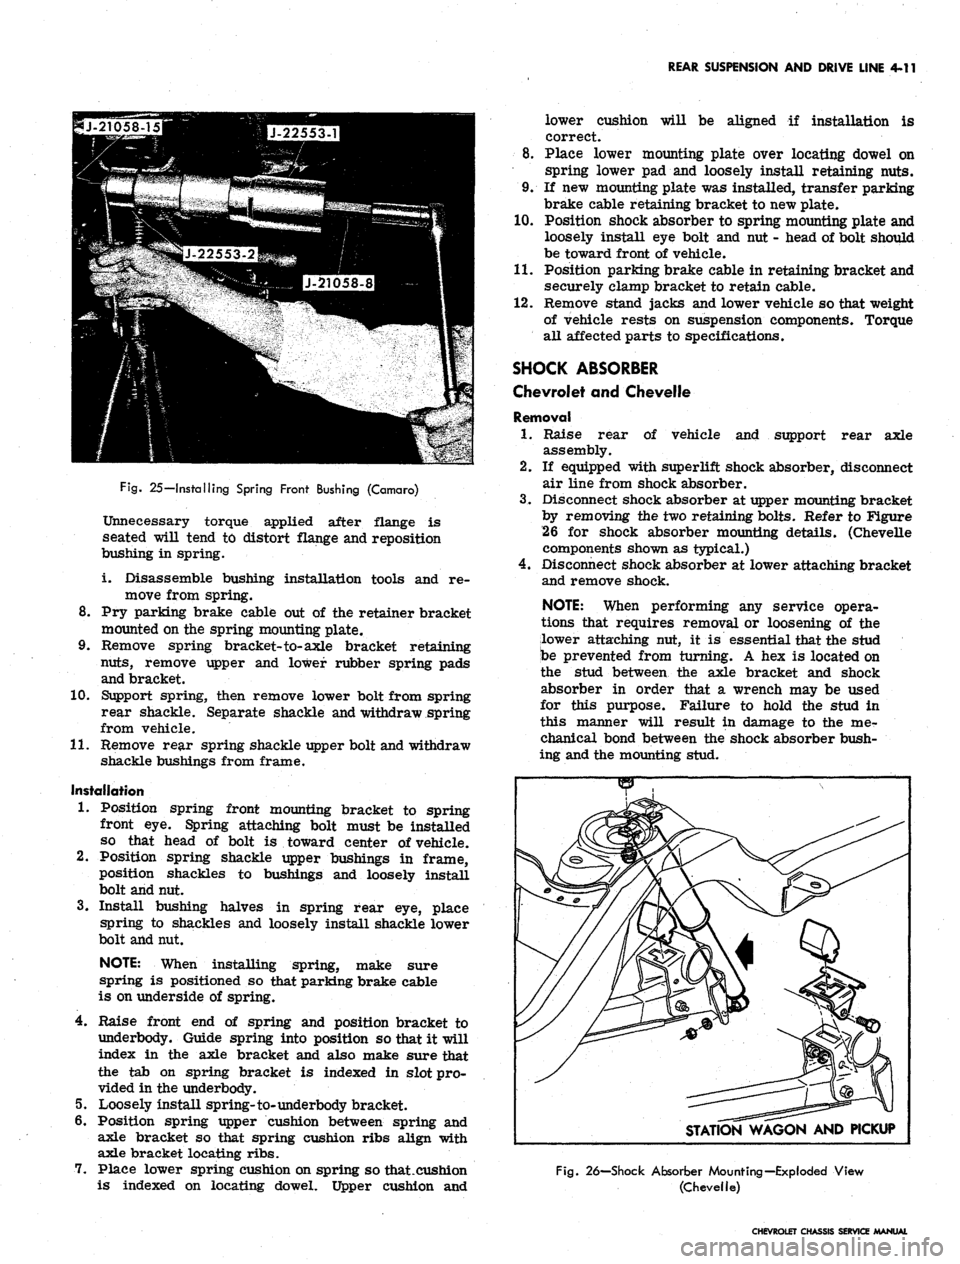 CHEVROLET CAMARO 1967 1.G Chassis Workshop Manual 
REAR SUSPENSION AND DRIVE LINE 4-11

lower cushion

correct. 
will be aligned if installation is

Fig.
 25—Installing Spring Front Bushing (Camaro)

Unnecessary torque applied after flange is

seat